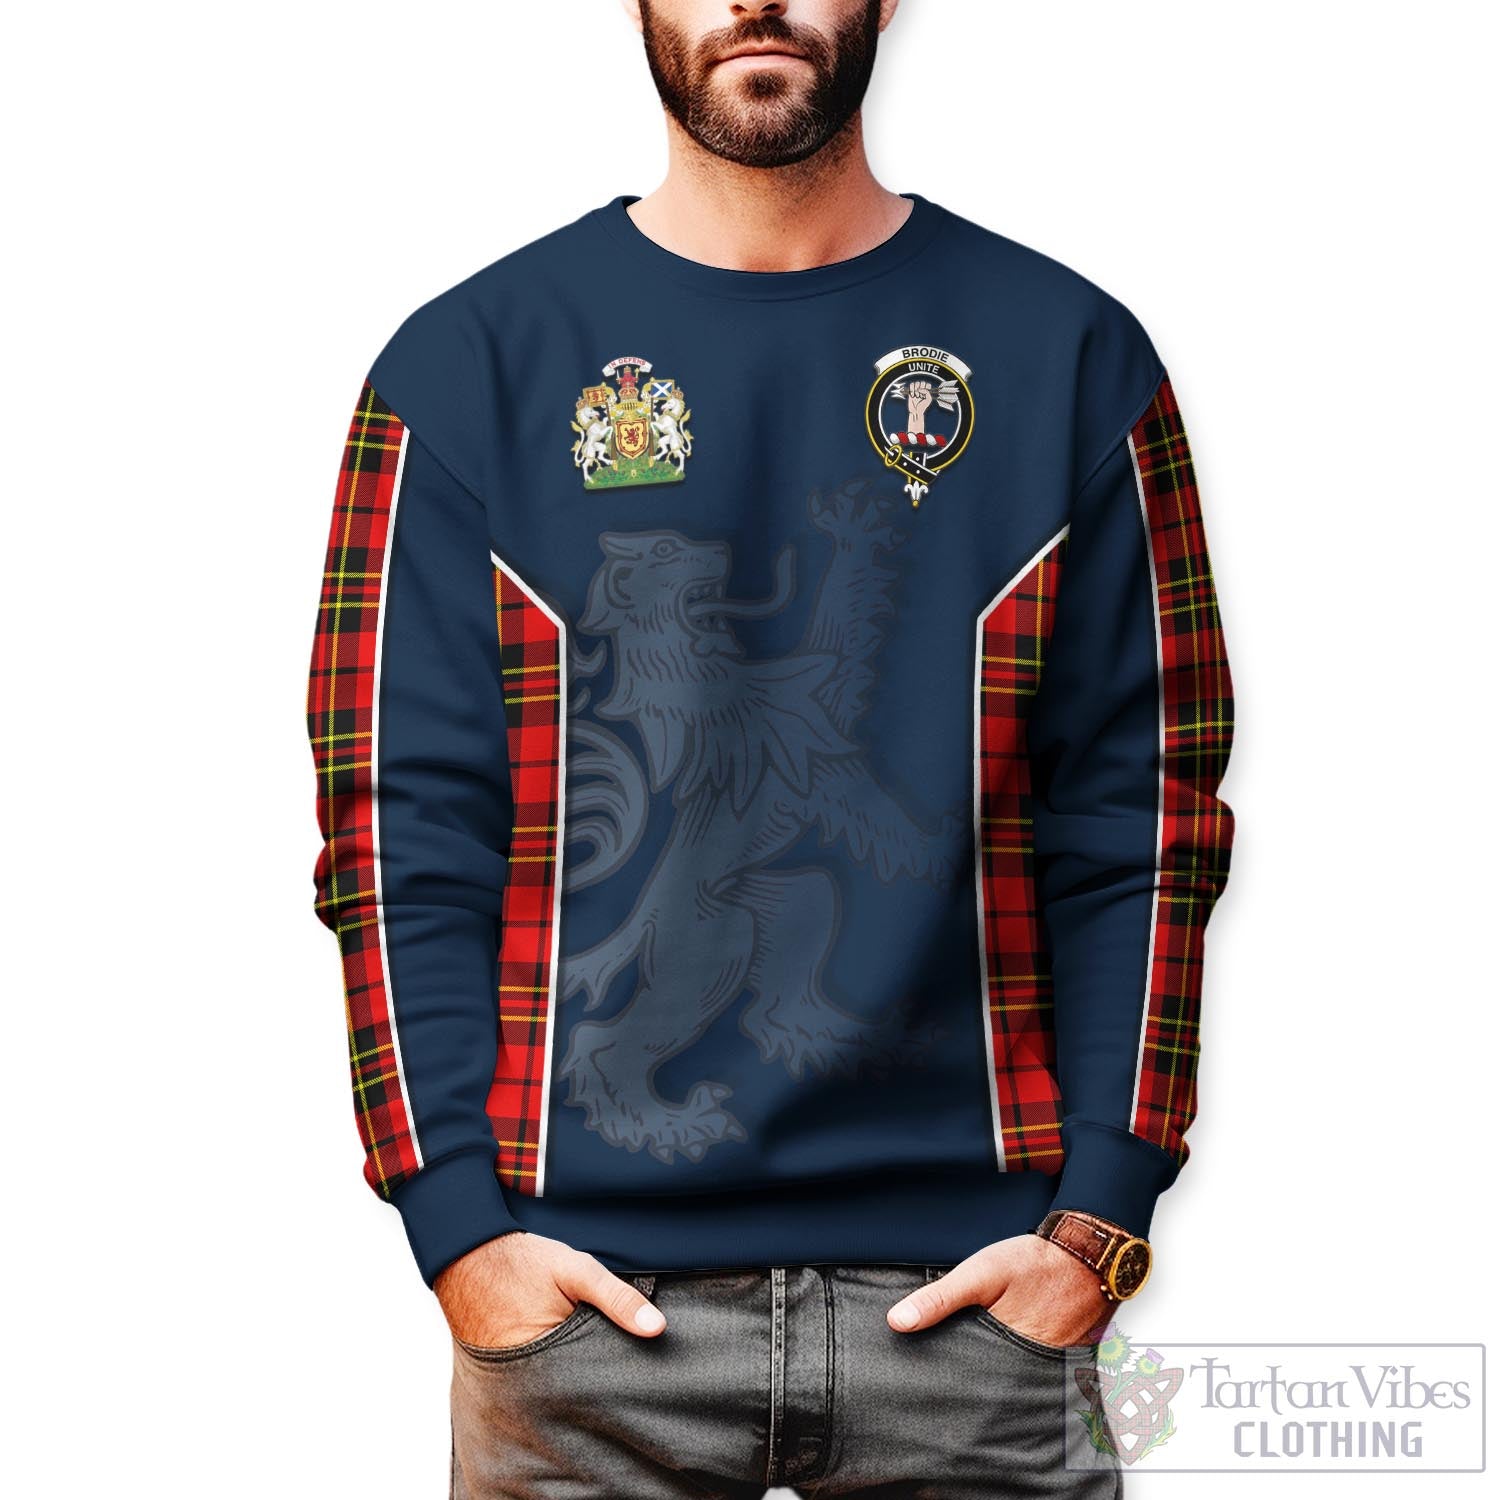 Tartan Vibes Clothing Brodie Modern Tartan Sweater with Family Crest and Lion Rampant Vibes Sport Style